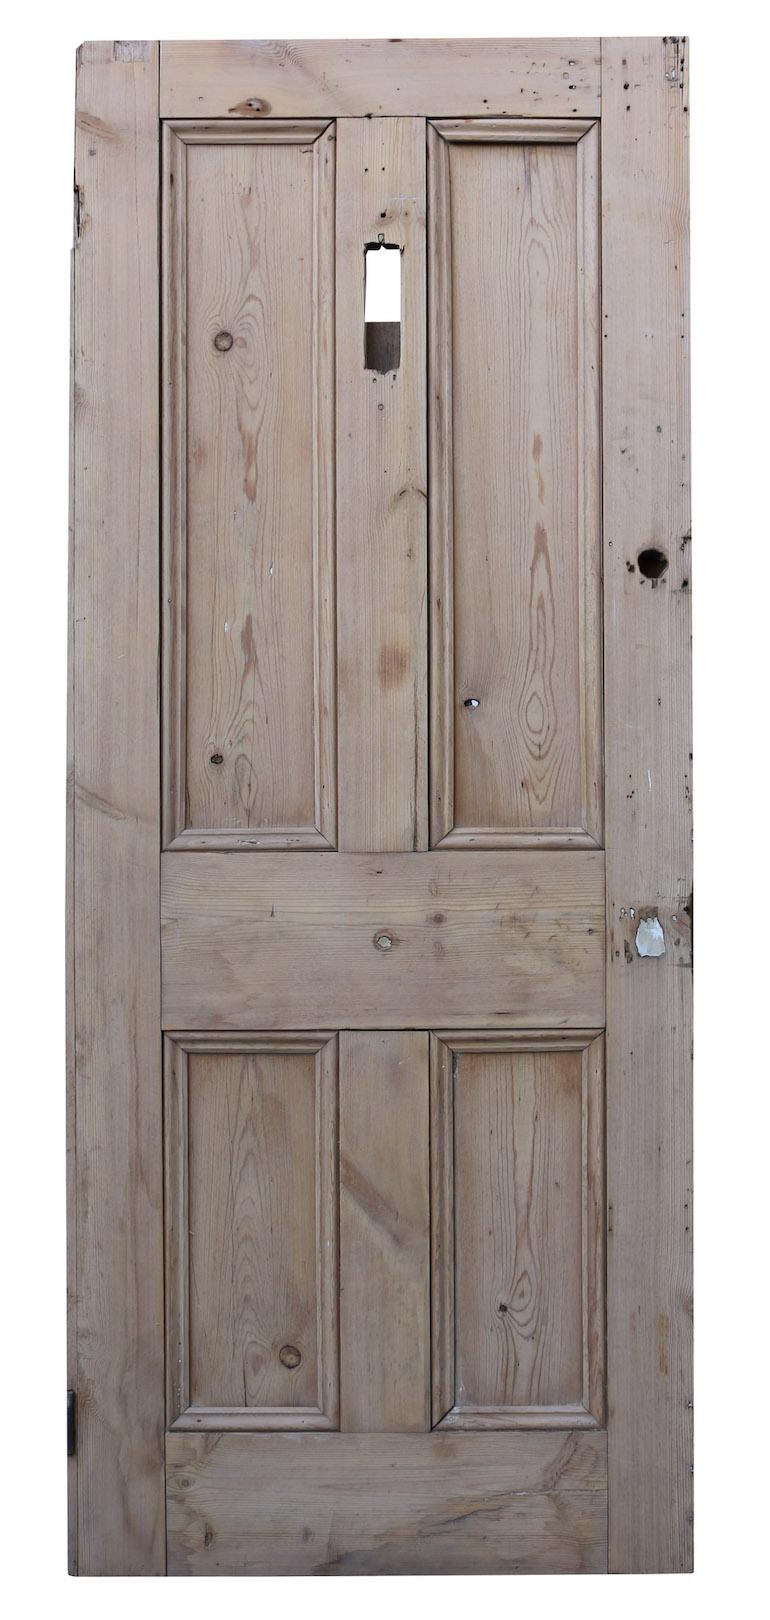 A reclaimed exterior door made from pine, with a stripped and sanded finish.